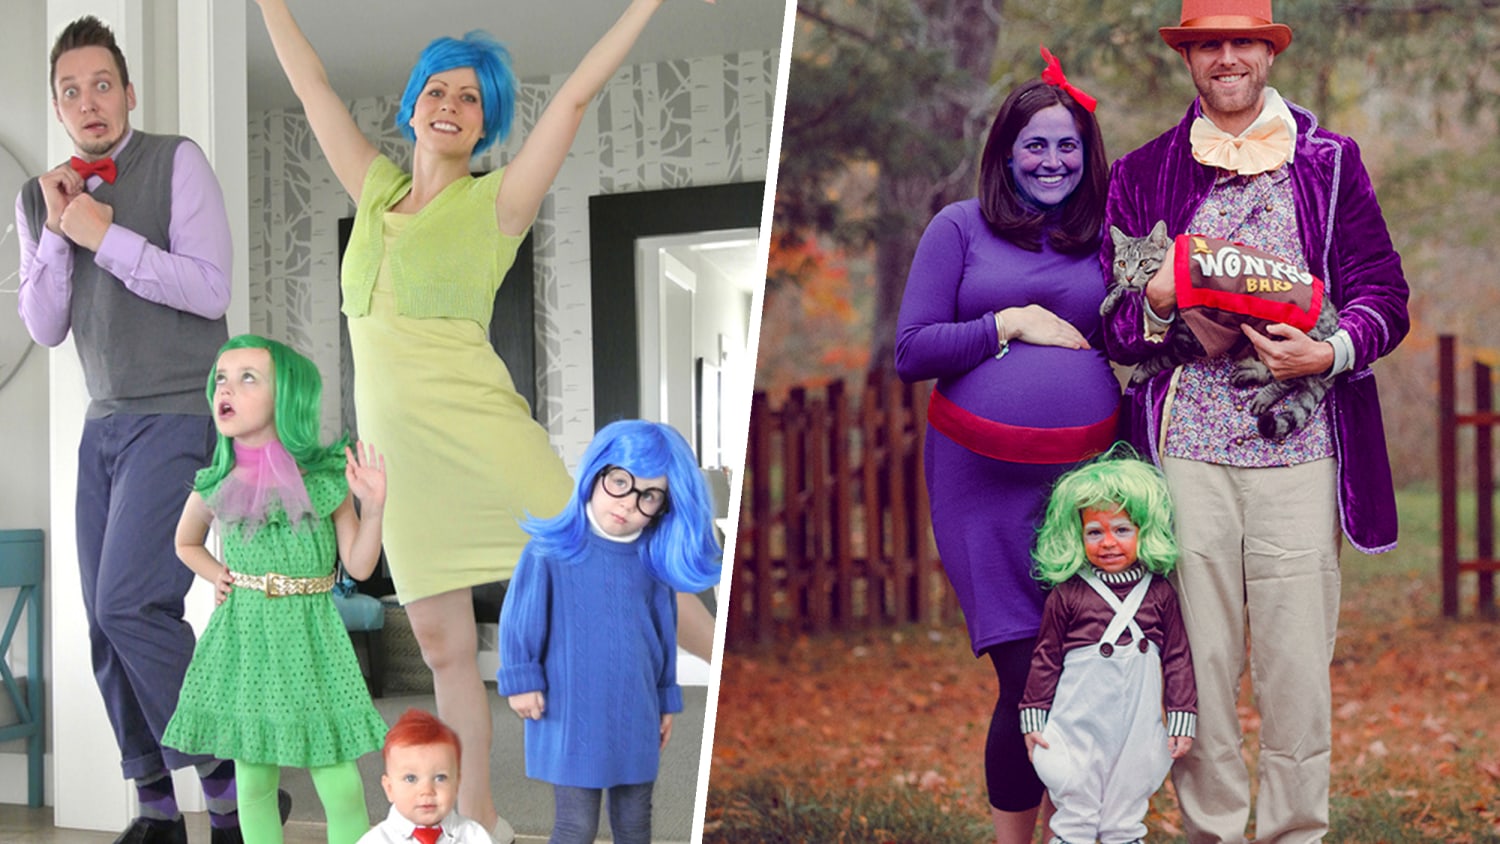 Family Halloween costumes: 8 Pinterest ideas to inspire you.